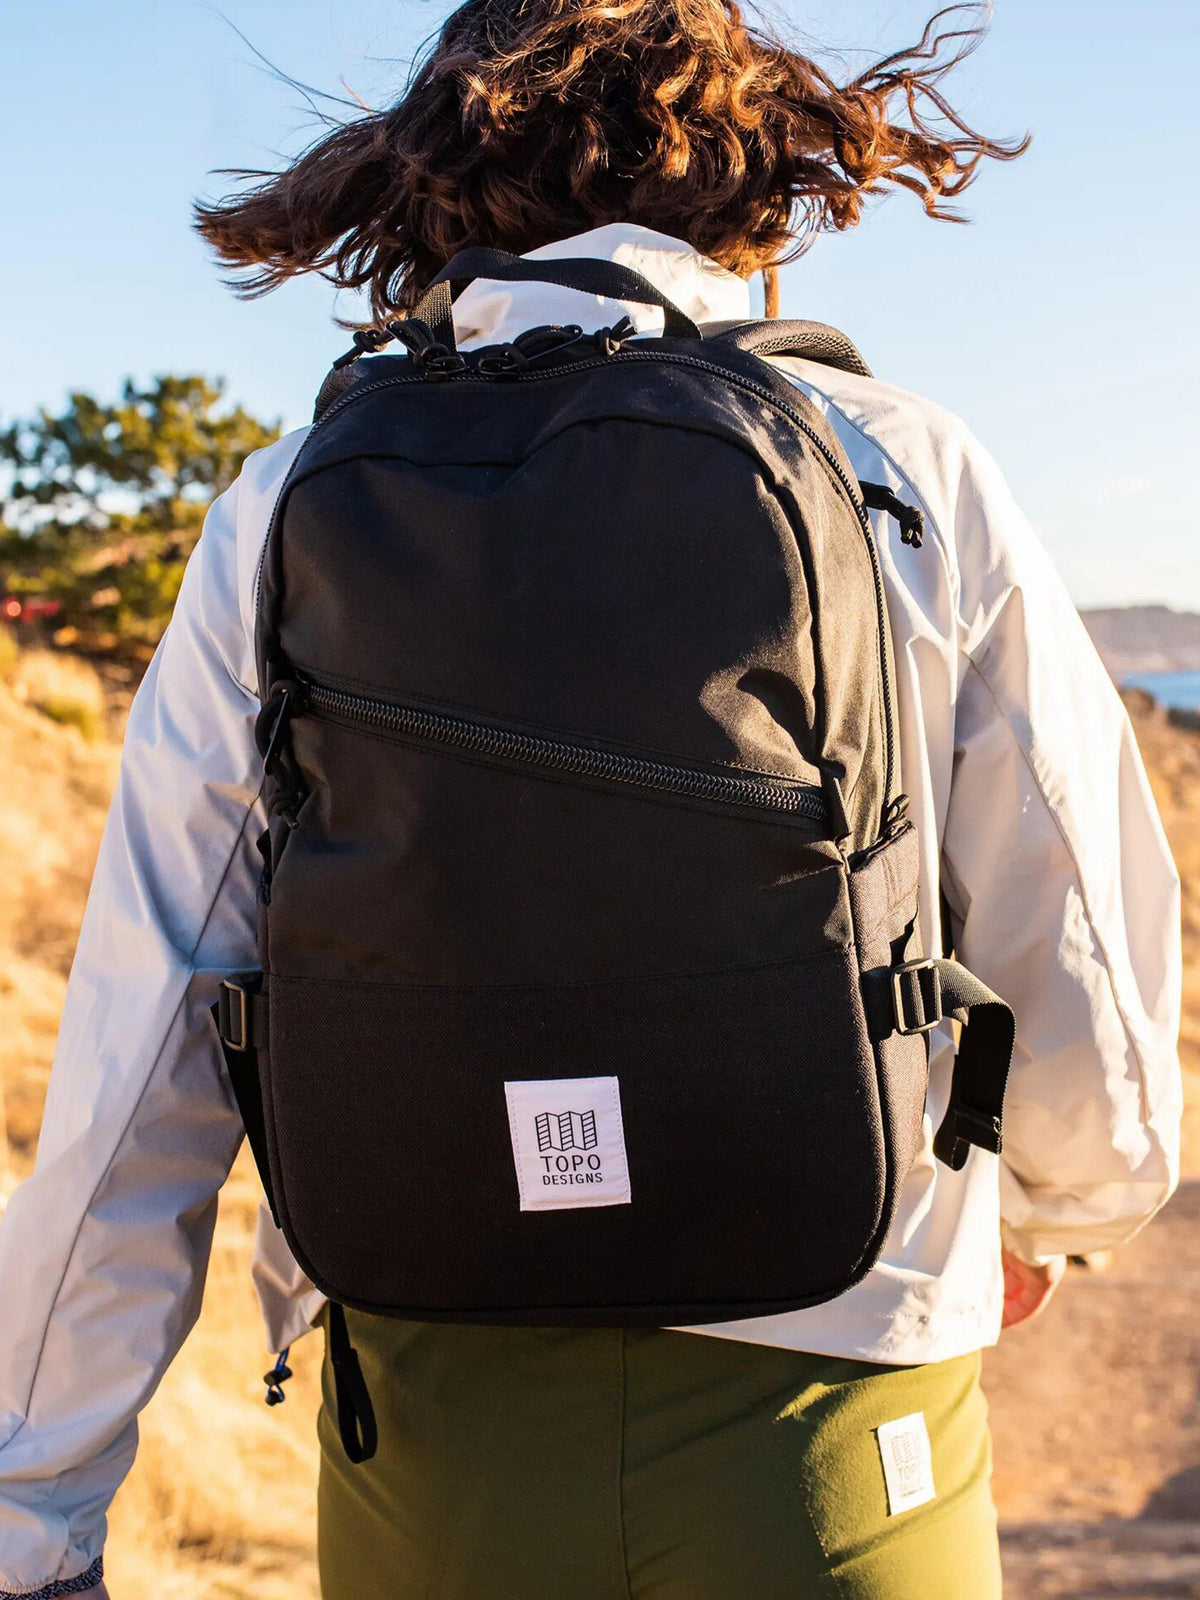 Topo Designs Standard Pack Charcoal